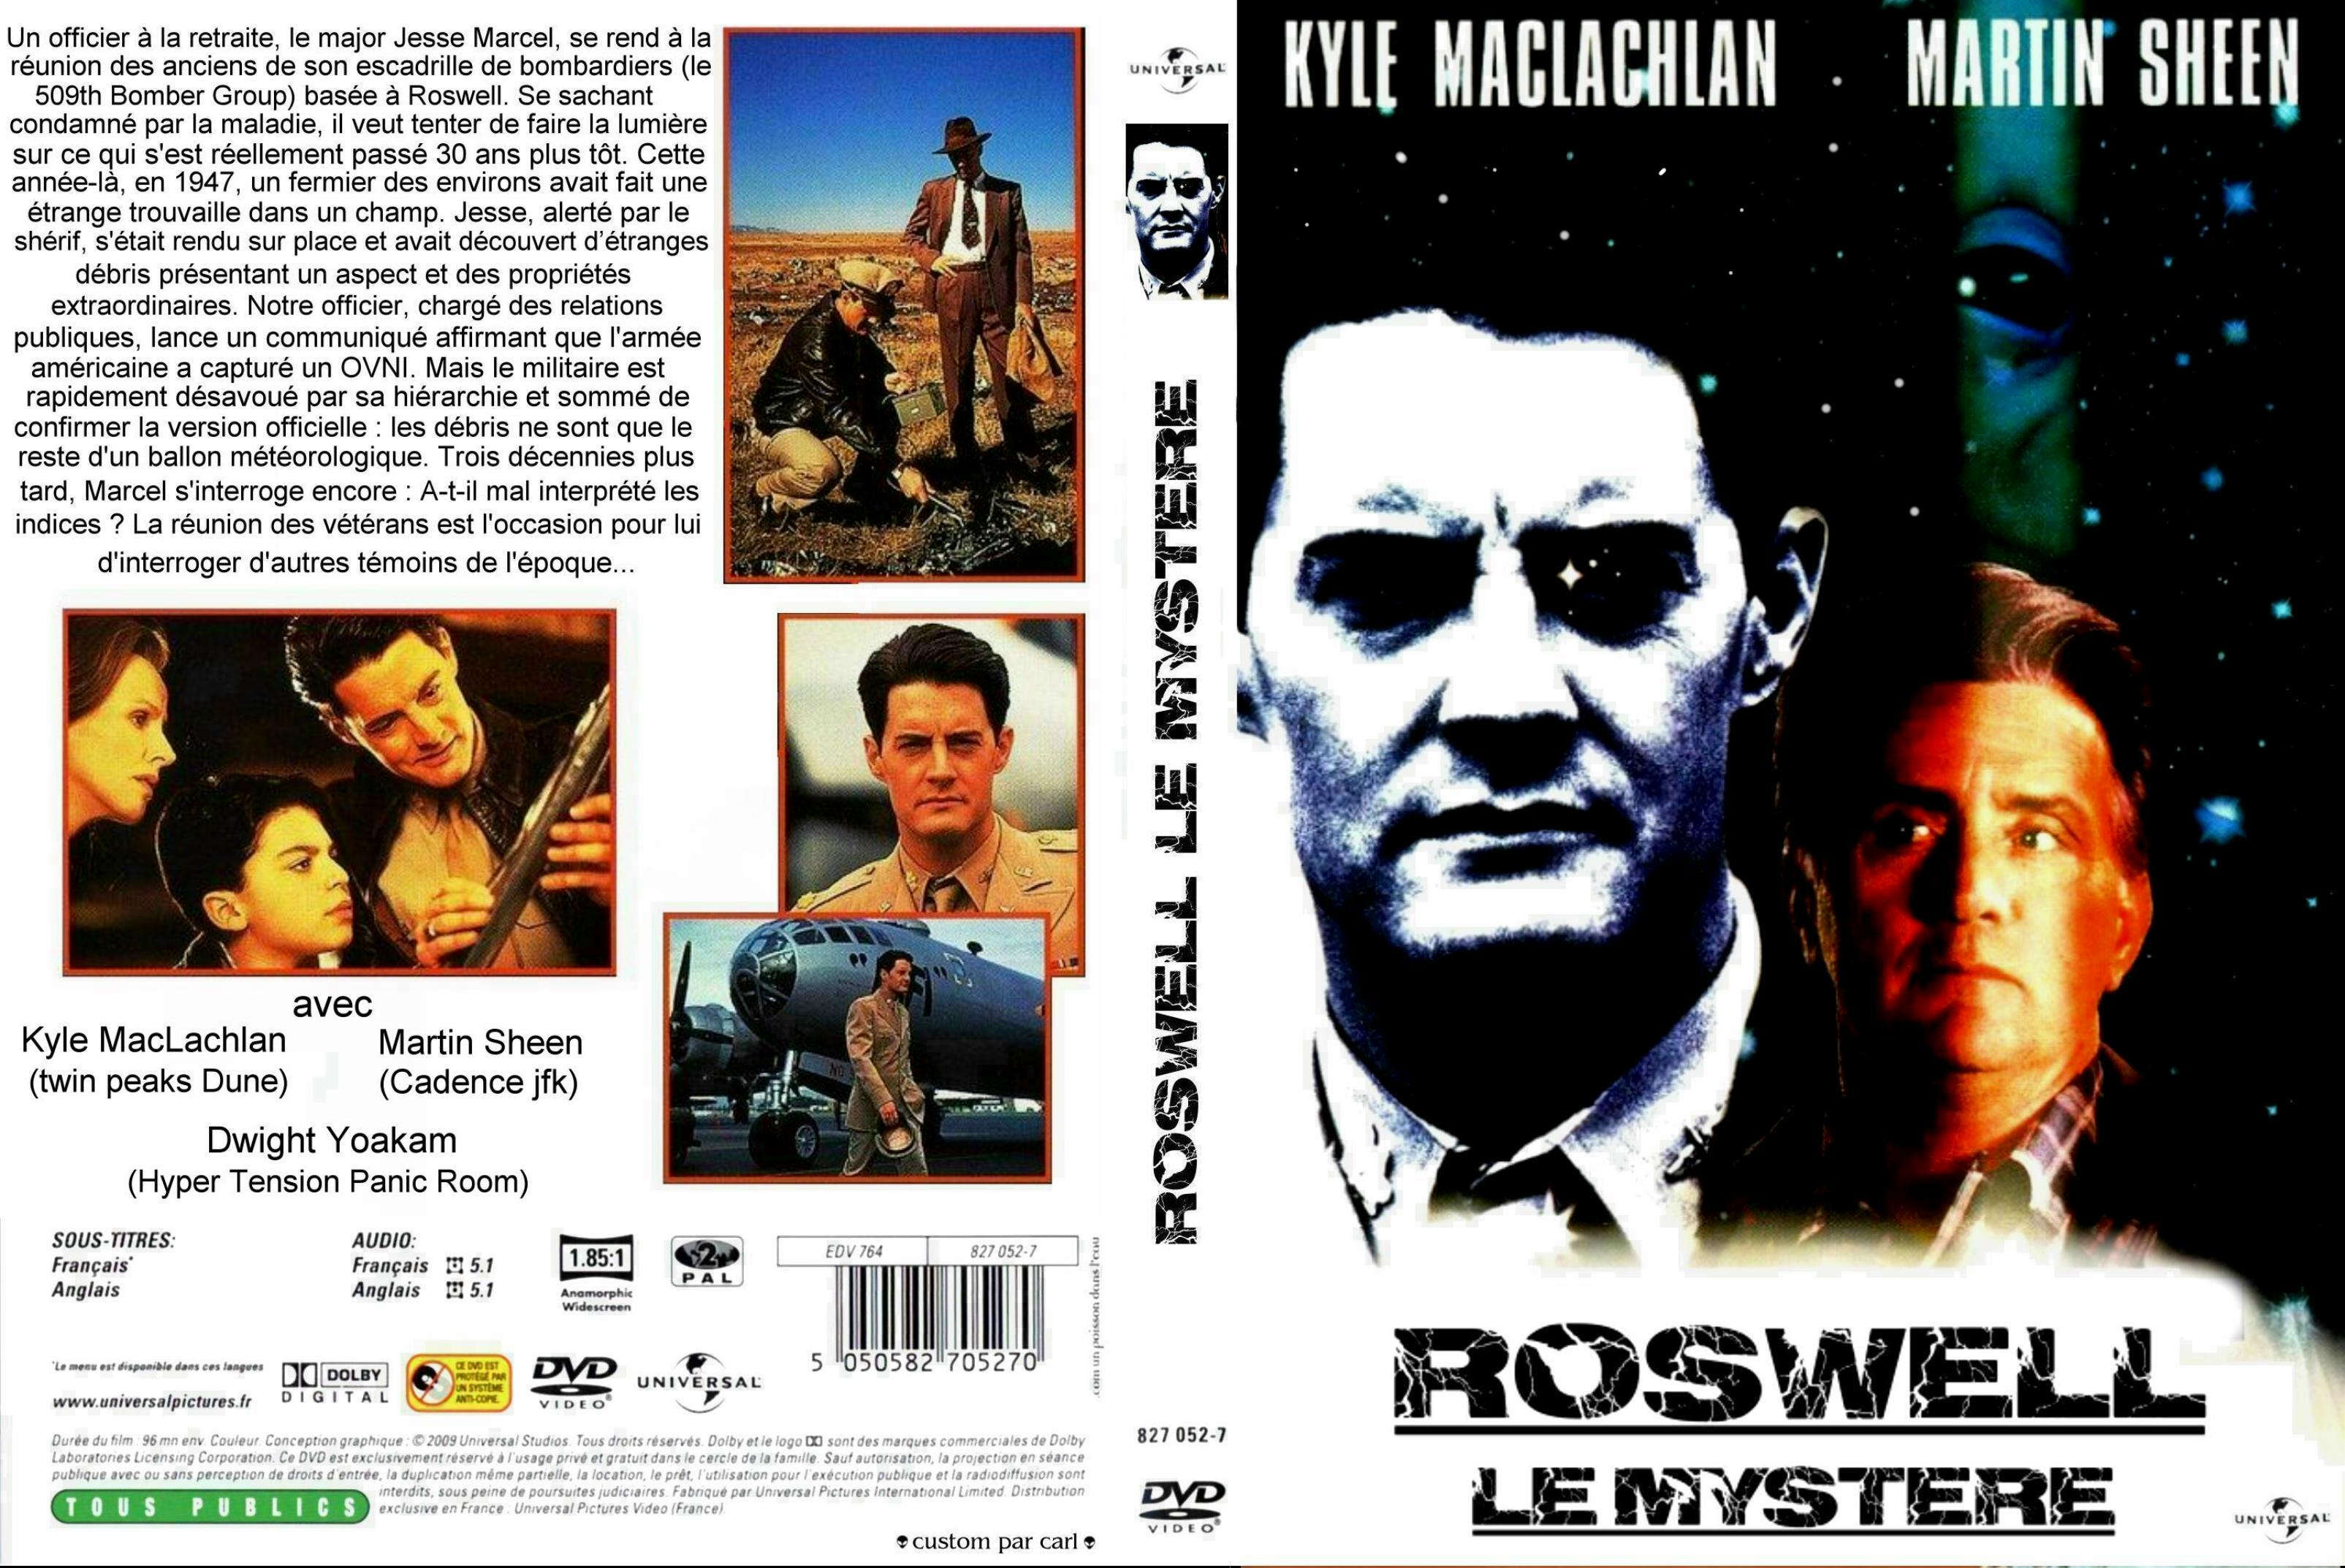 Jaquette DVD Roswell le mystre custom